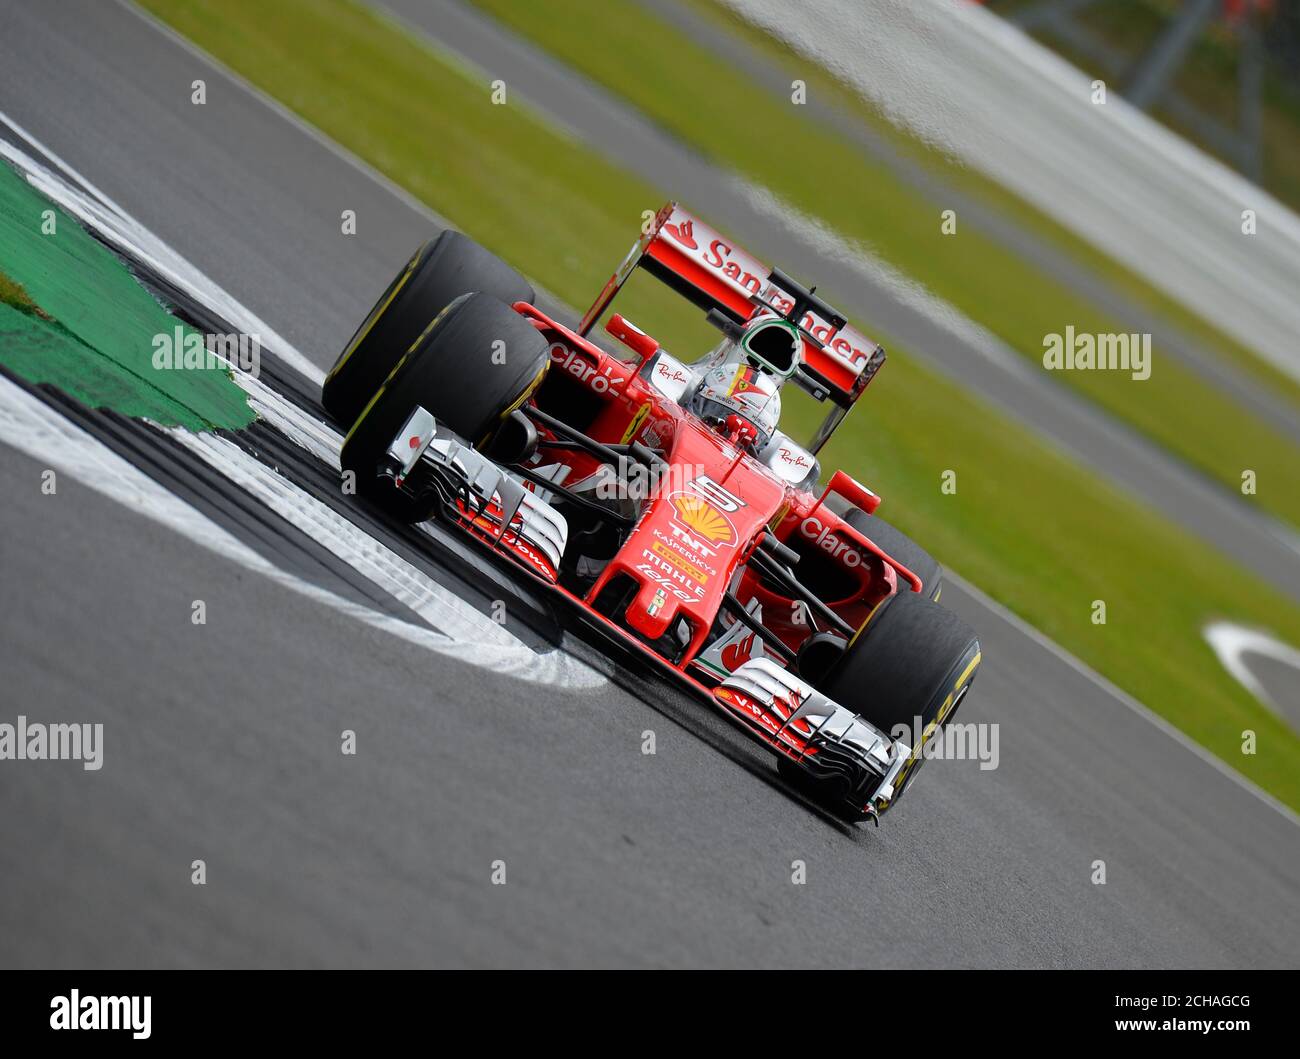 Ferrari's Sebastian Vettel during Practice Day for the 2016 British Grand Prix at Silverstone Circuit, Towcester. PRESS ASSOCIATION Photo. Picture date: Friday July 8, 2016. See PA story AUTO British. Photo credit should read: Tony Marshall/PA Wire. RESTRICTIONS: Editorial use only. Commercial use with prior consent from teams. Call +44 (0)1158 447447 for further information. Stock Photo